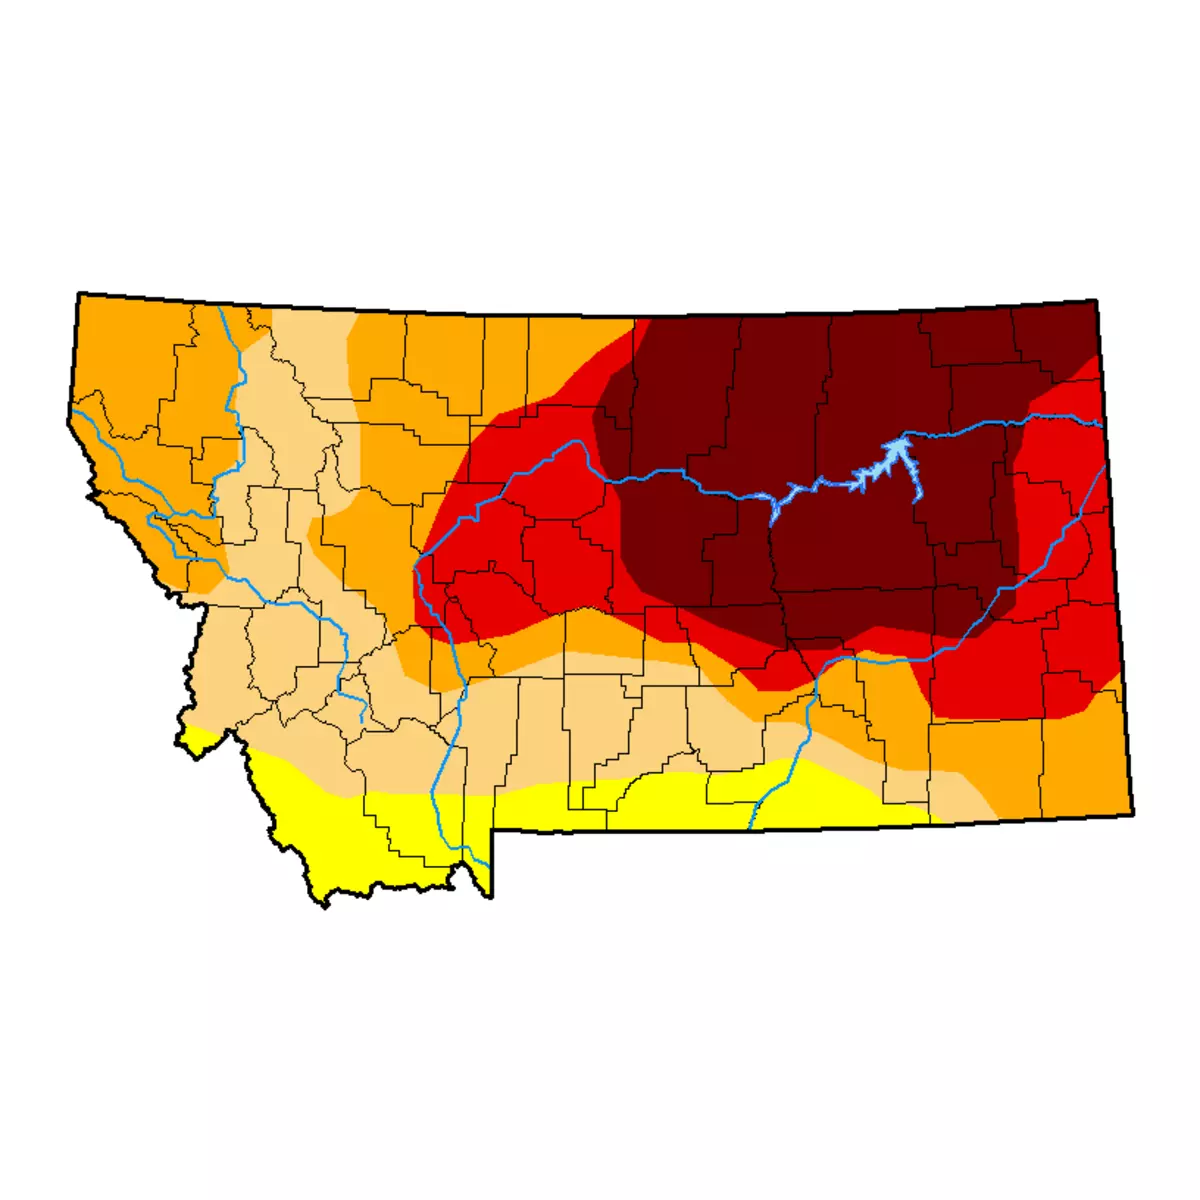 Drought in Montana Worst in 30 Years, 'Extraordinary Swing' in Just